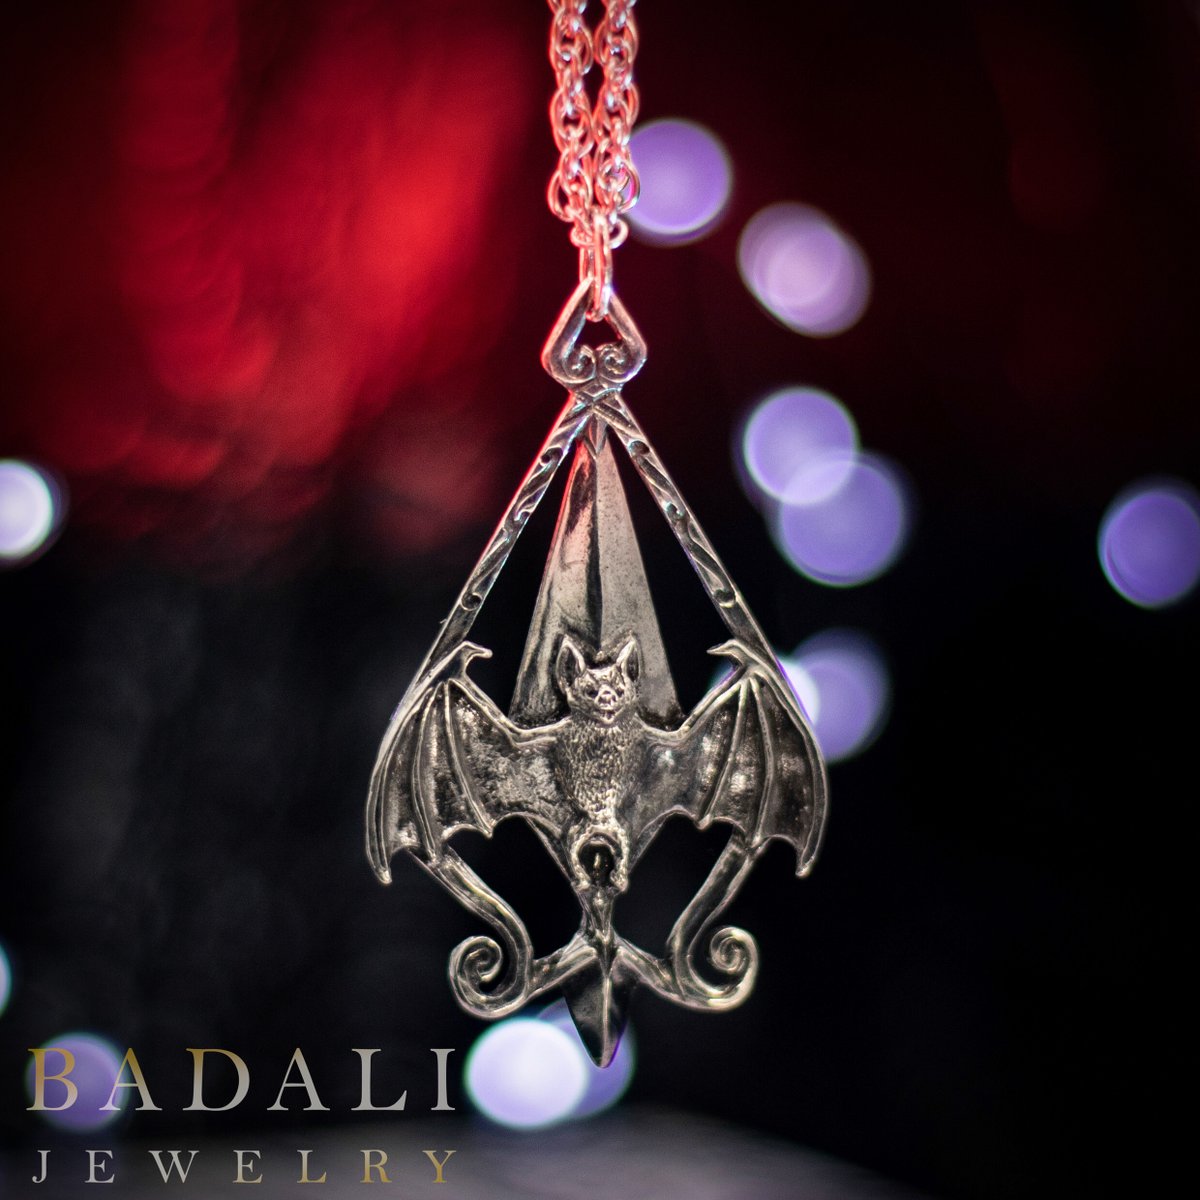 “Listen to them—the children of the night. What music they make!”

Officially licensed Bram Stoker’s Dracula Collection available at badalijewelry.com/collections/br… 

#BramStoker #Dracula #BramStokerDracula  #BatNecklace